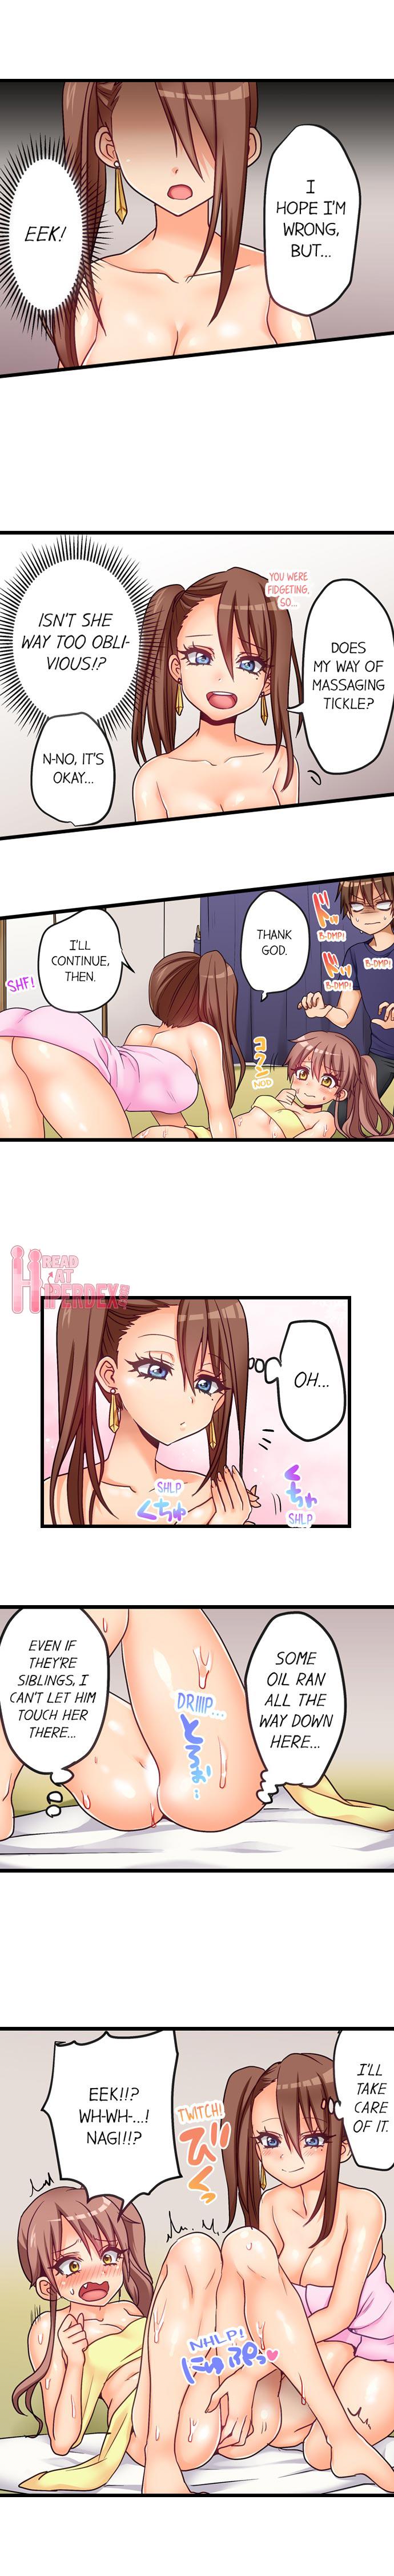 Bulge Porori] My First Time is with.... My Little Sister?! - Original Double Penetration - Page 5